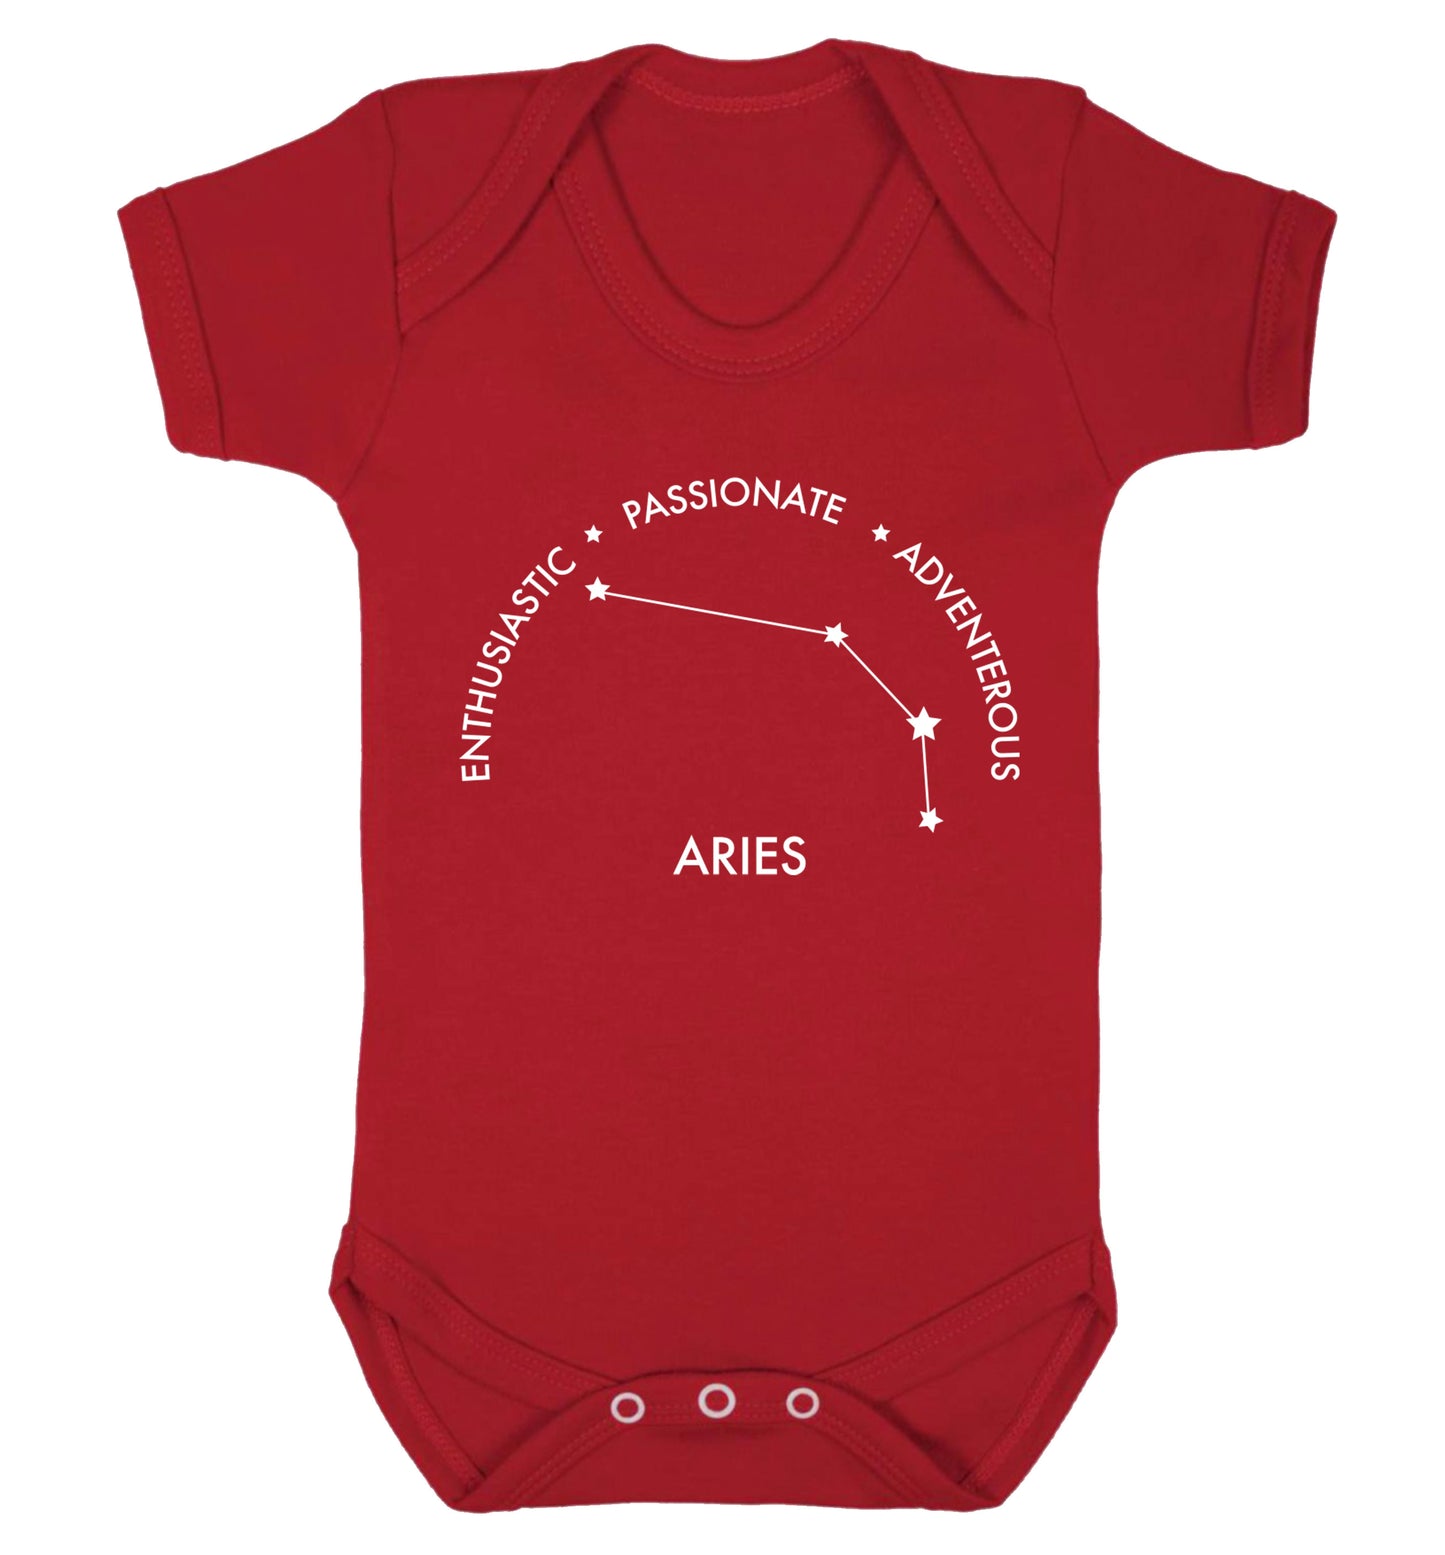 Aries enthusiastic | passionate | adventerous Baby Vest red 18-24 months